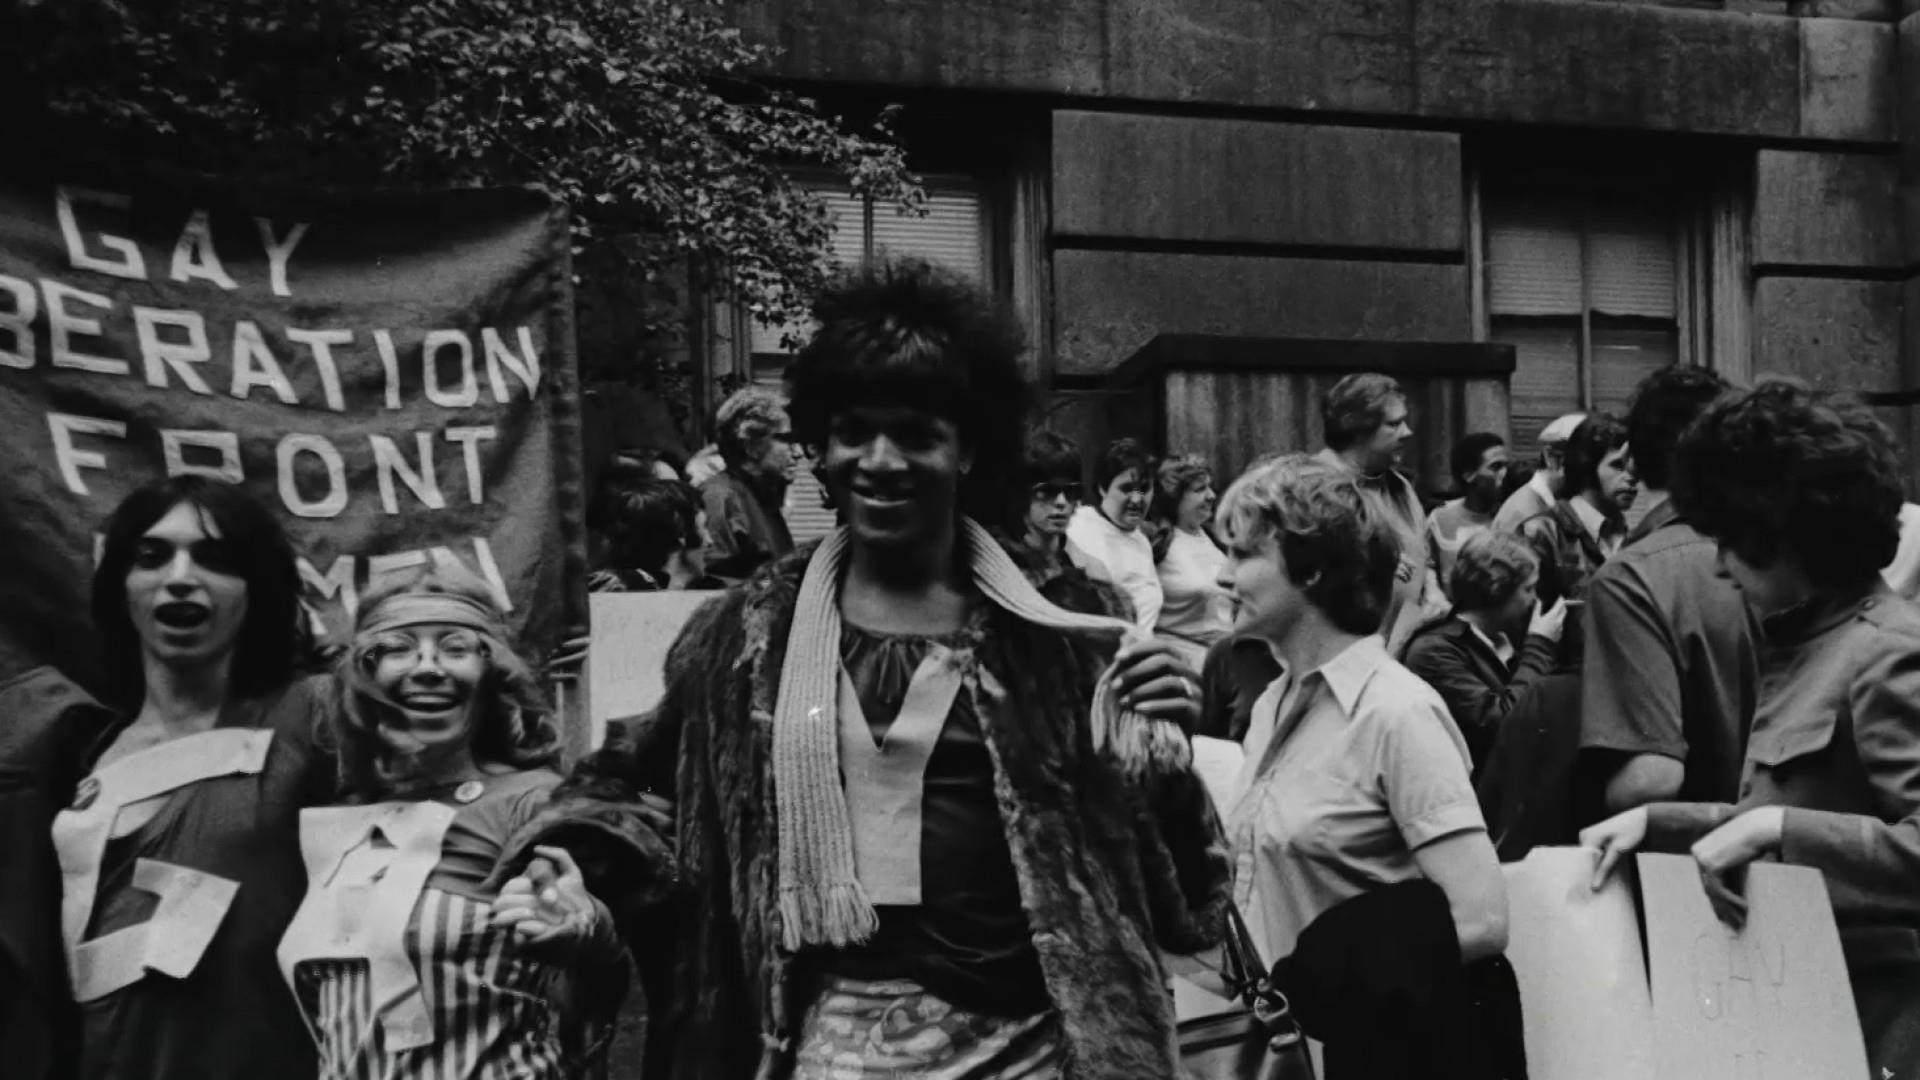 Marsha P. Johnson protesting outside City Hall with the group Gay Liberation Front in New York City.